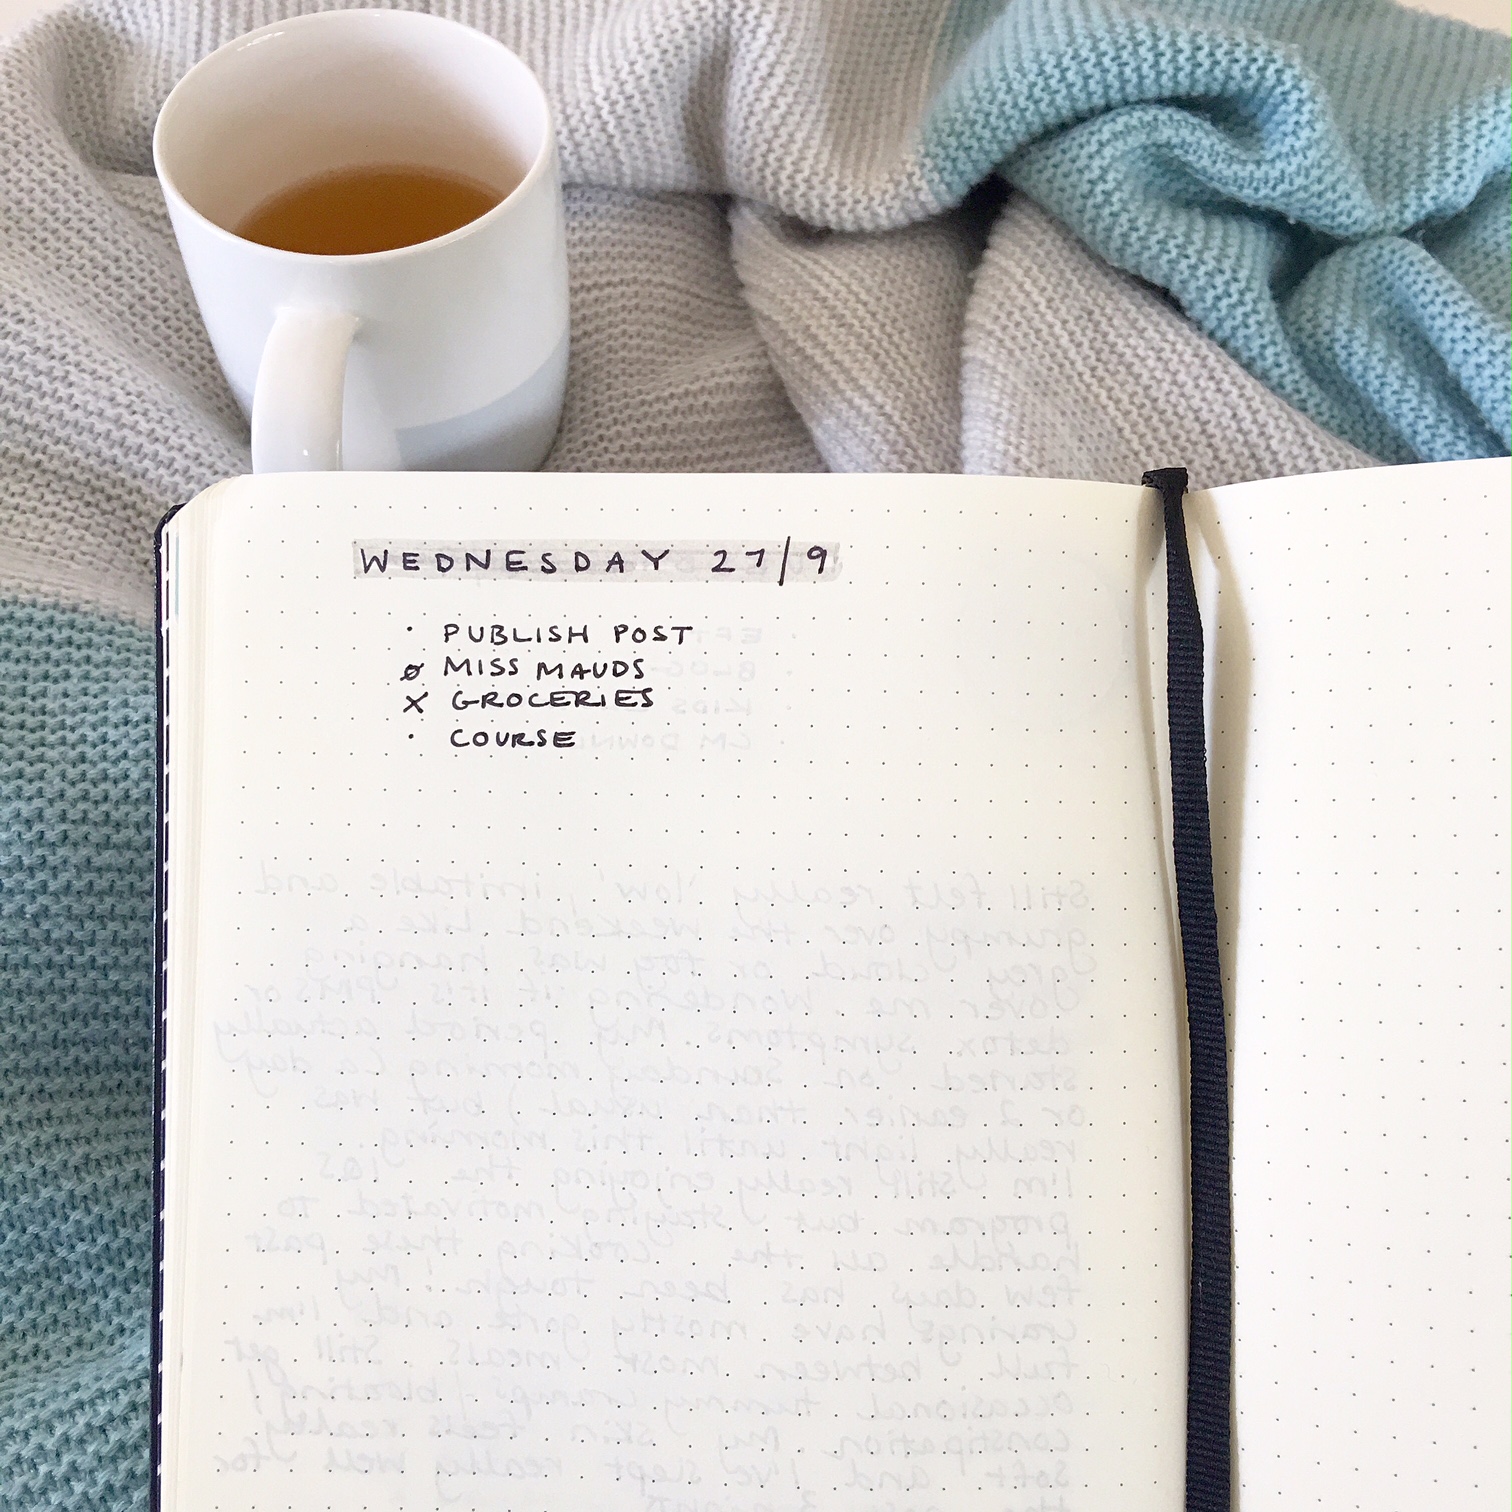 Yearly bullet journal reflection is an important step to staying on-purpose